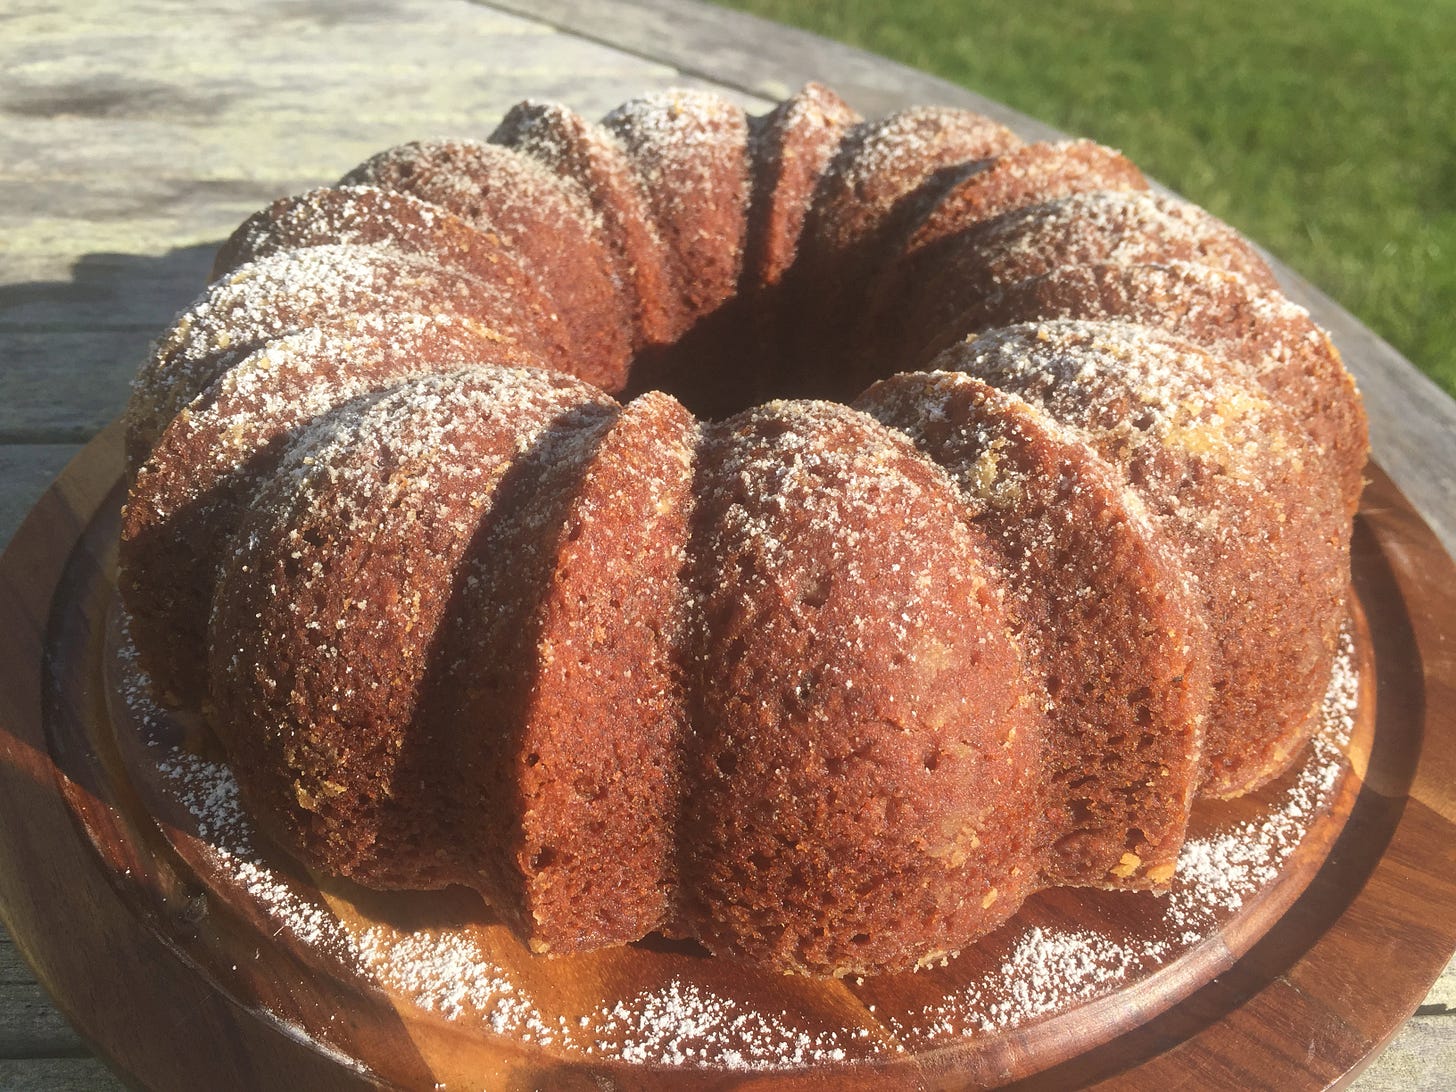 A golden brown ridged bundt cake, dusted with powdered sugar. sits on a platter on an outdoor table.